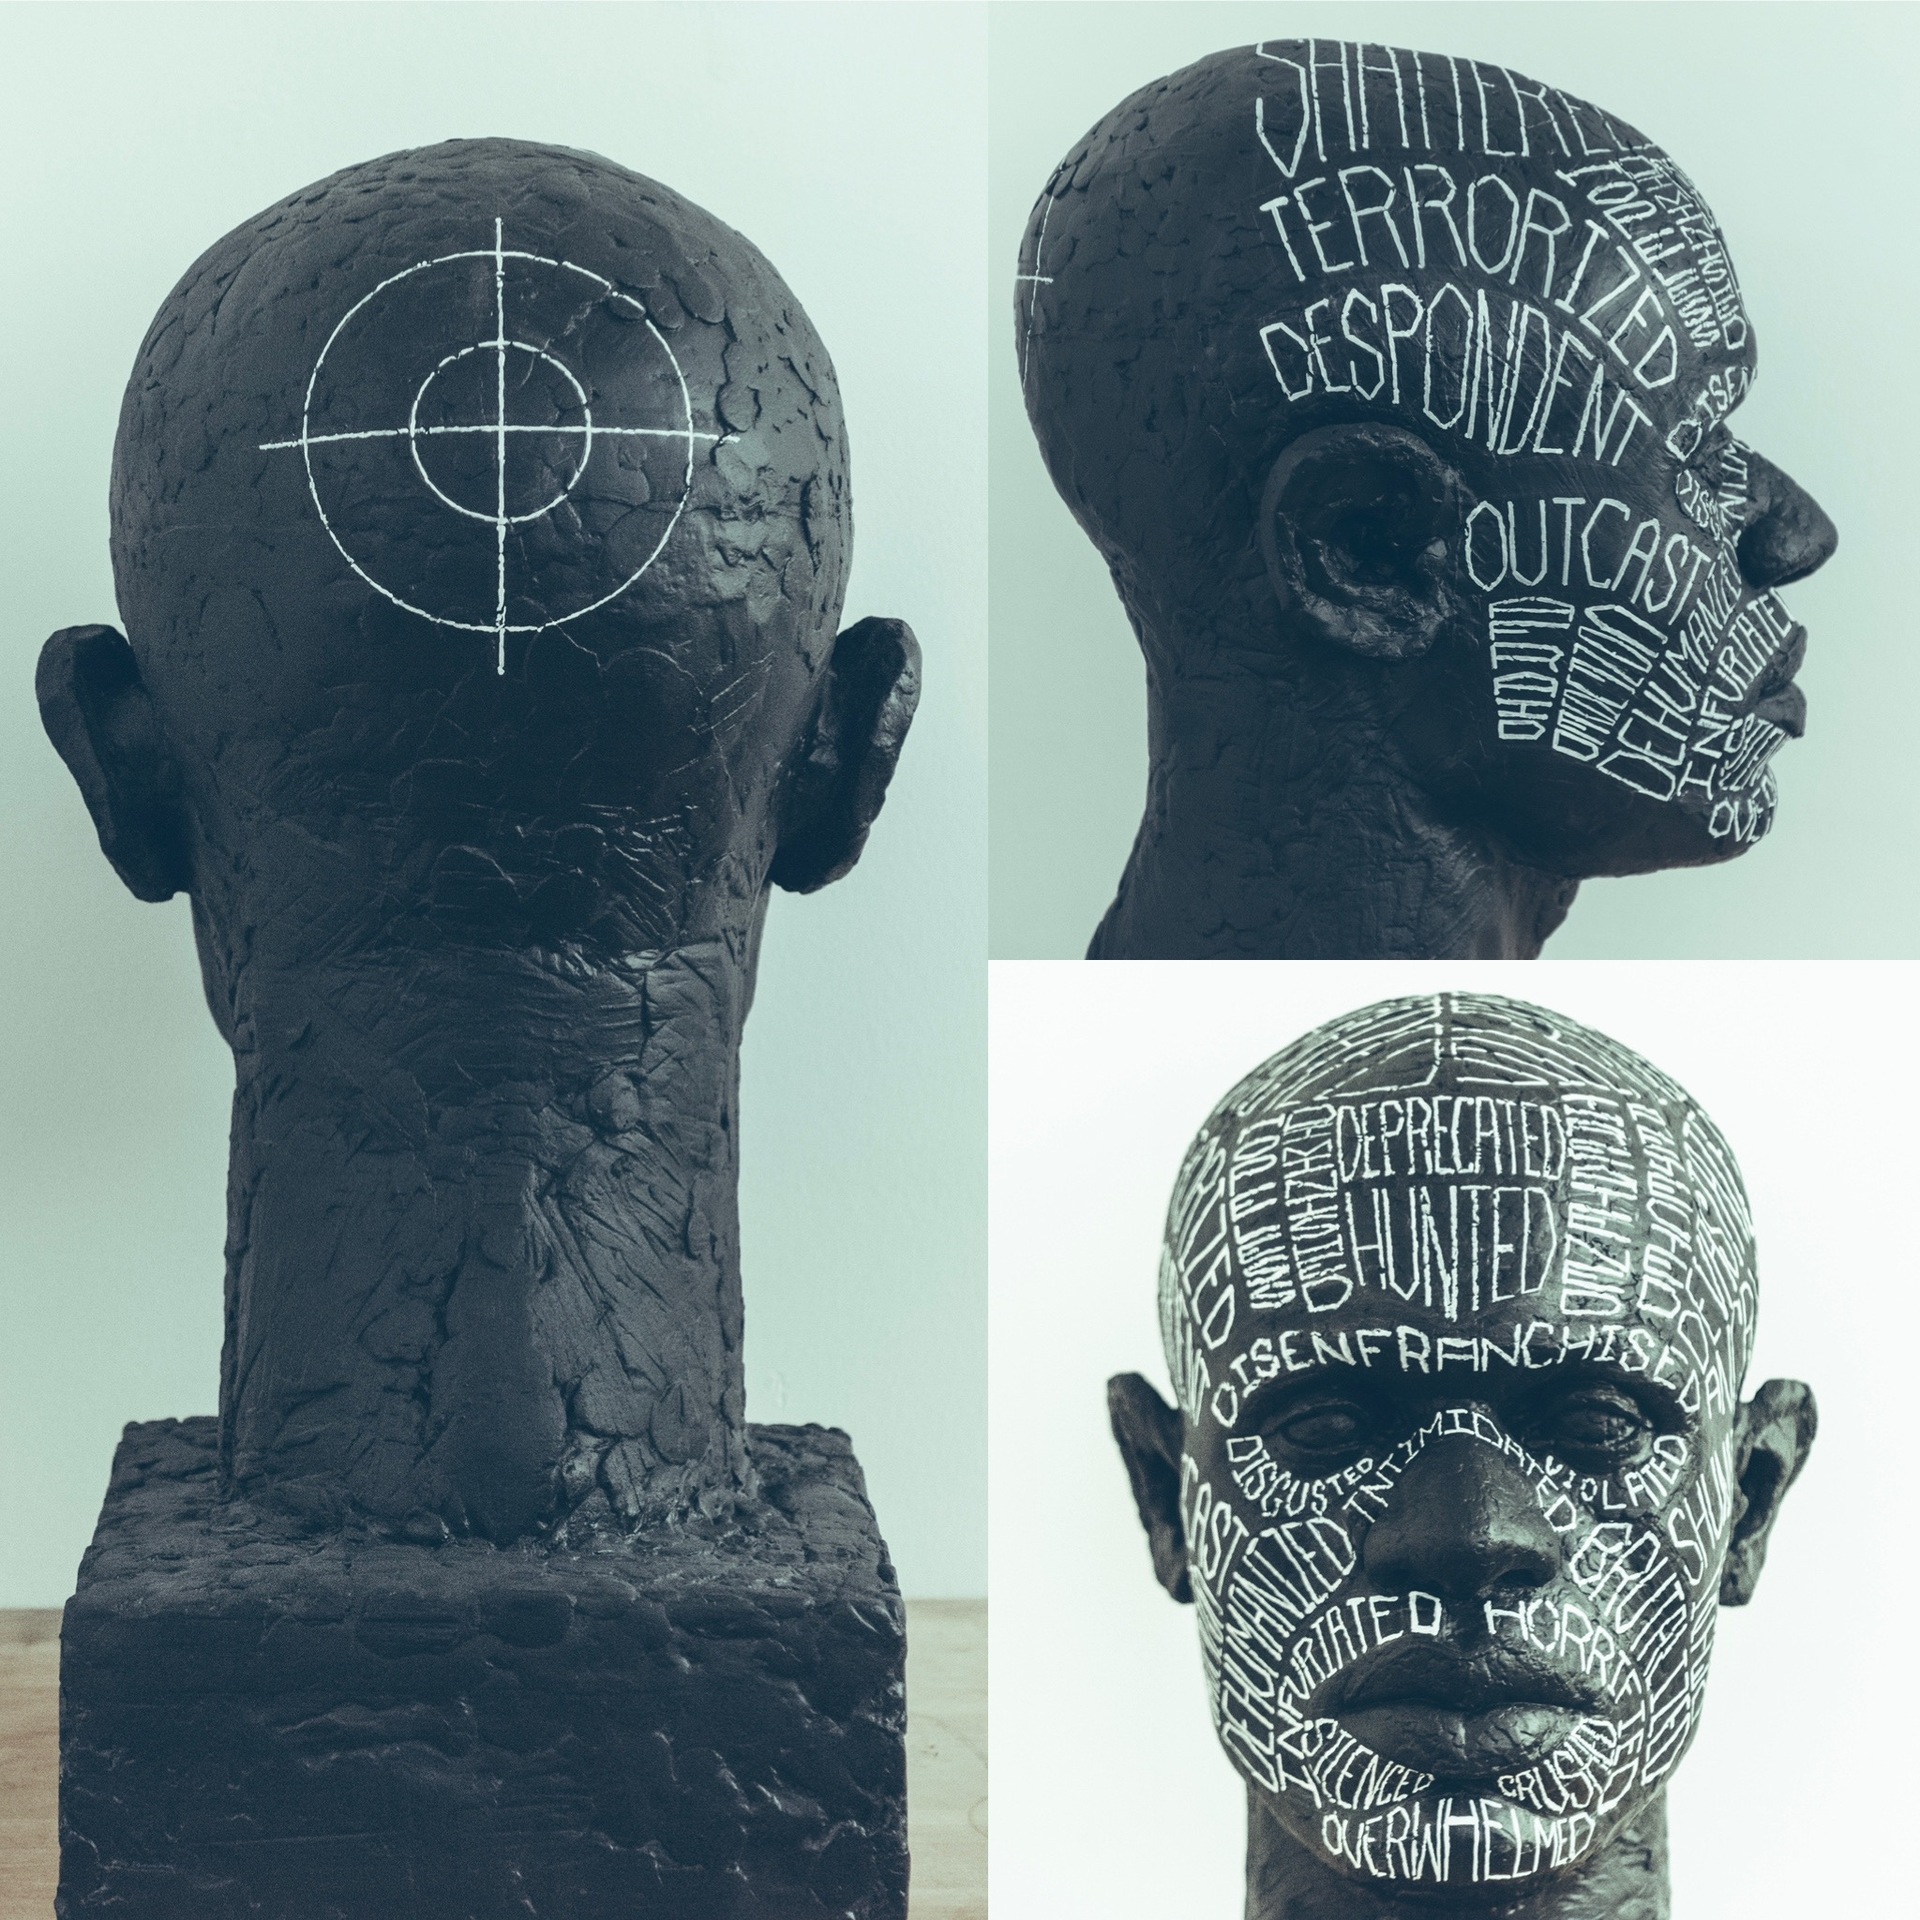 Jason McCormack clay sculpture self portrait inscribed with text that desccribes the experience and perceptions of African Americans.